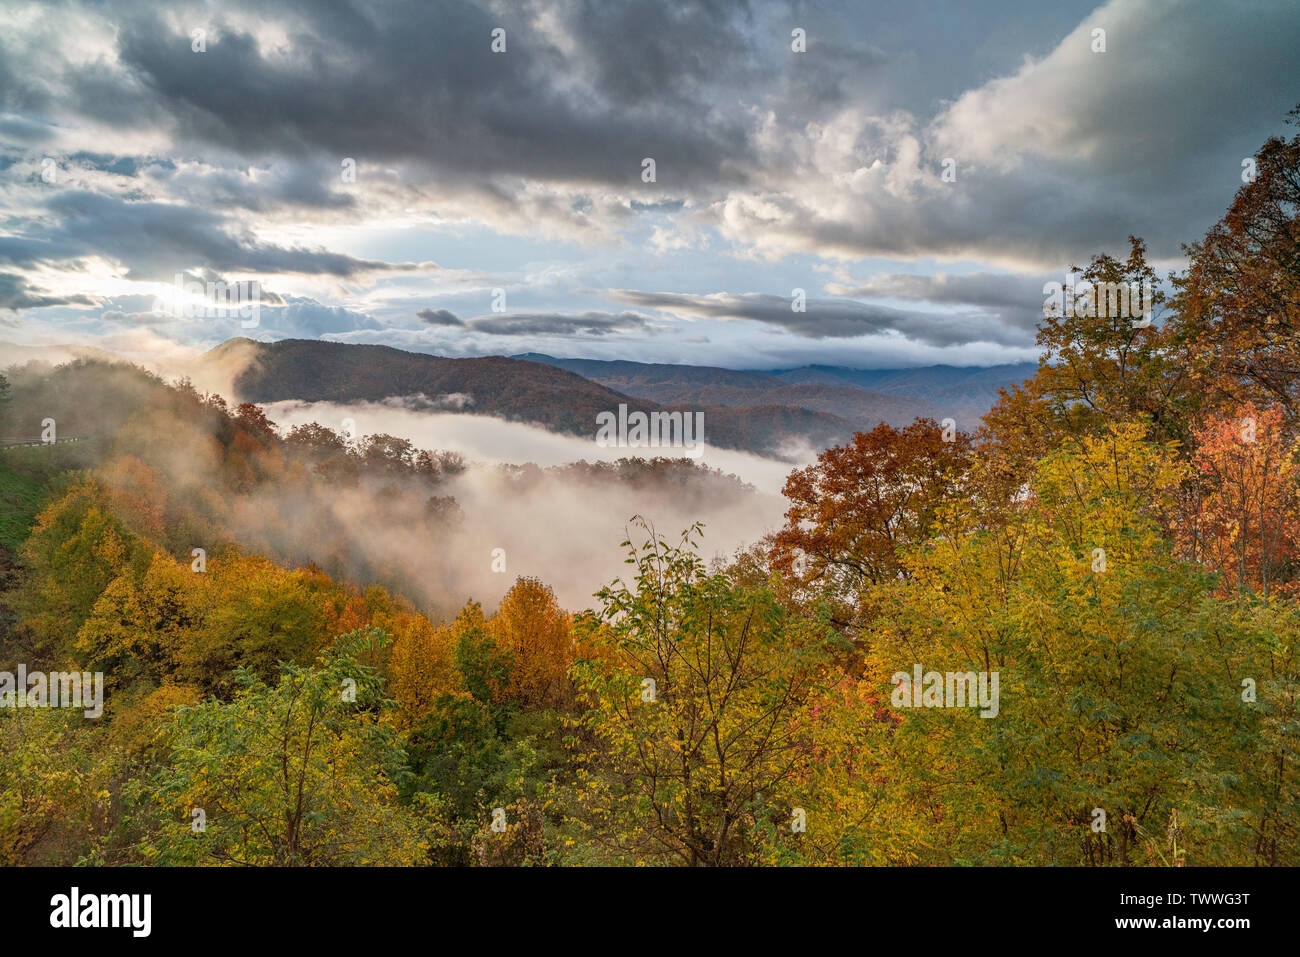 Beautiful foggy autumn day along the Foothills Parkway in Wears Valley in the Great Smoky Mountain National Park. Stock Photo